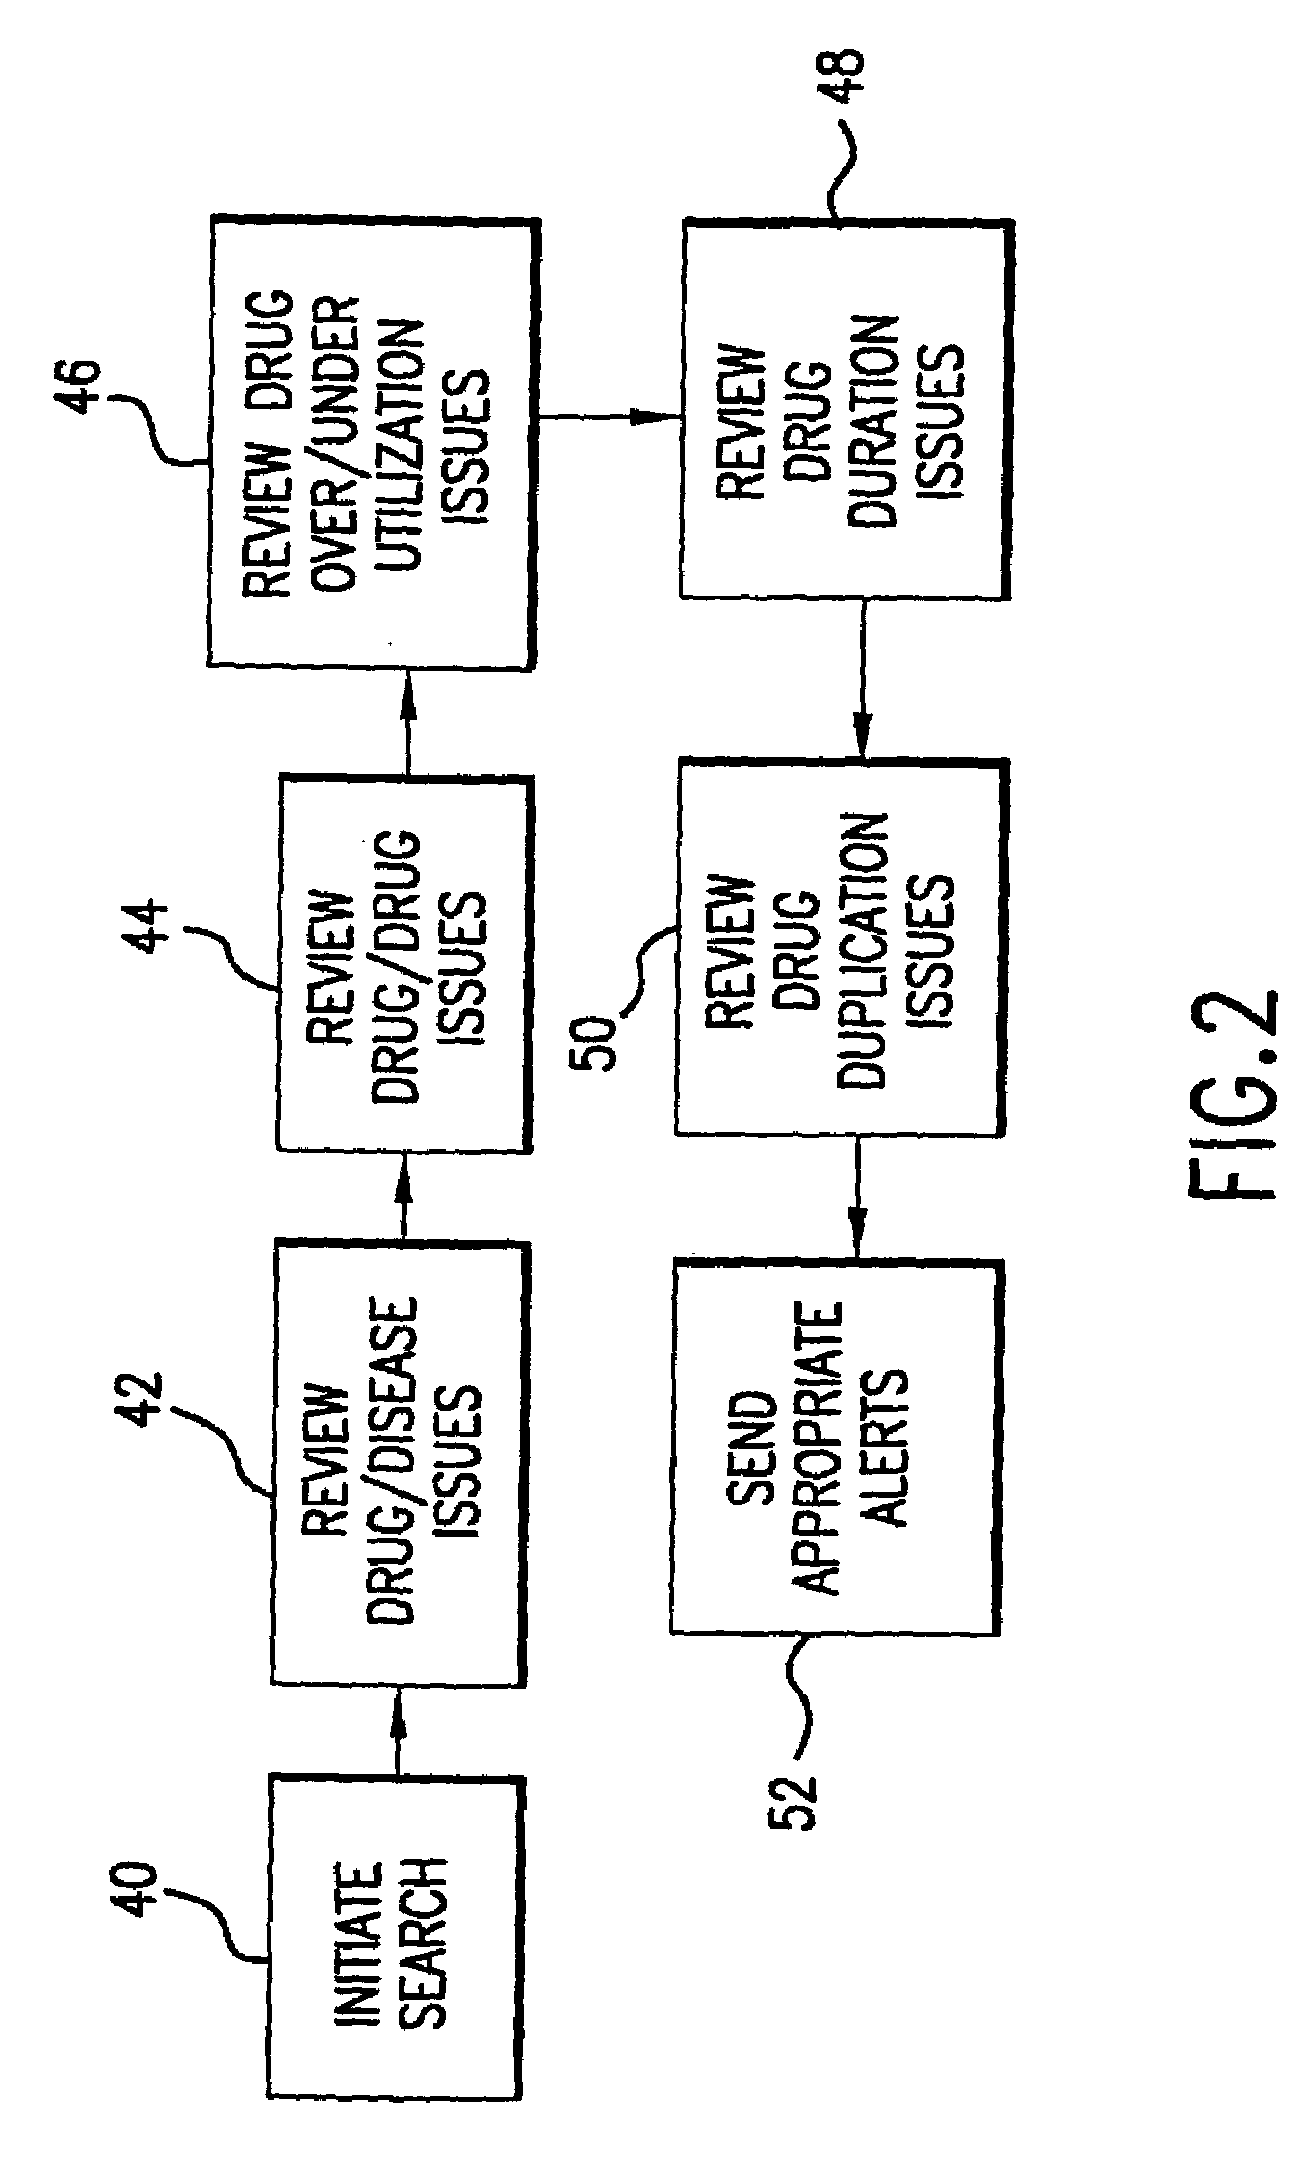 System for monitoring regulation of pharmaceuticals from data structure of medical and labortory records